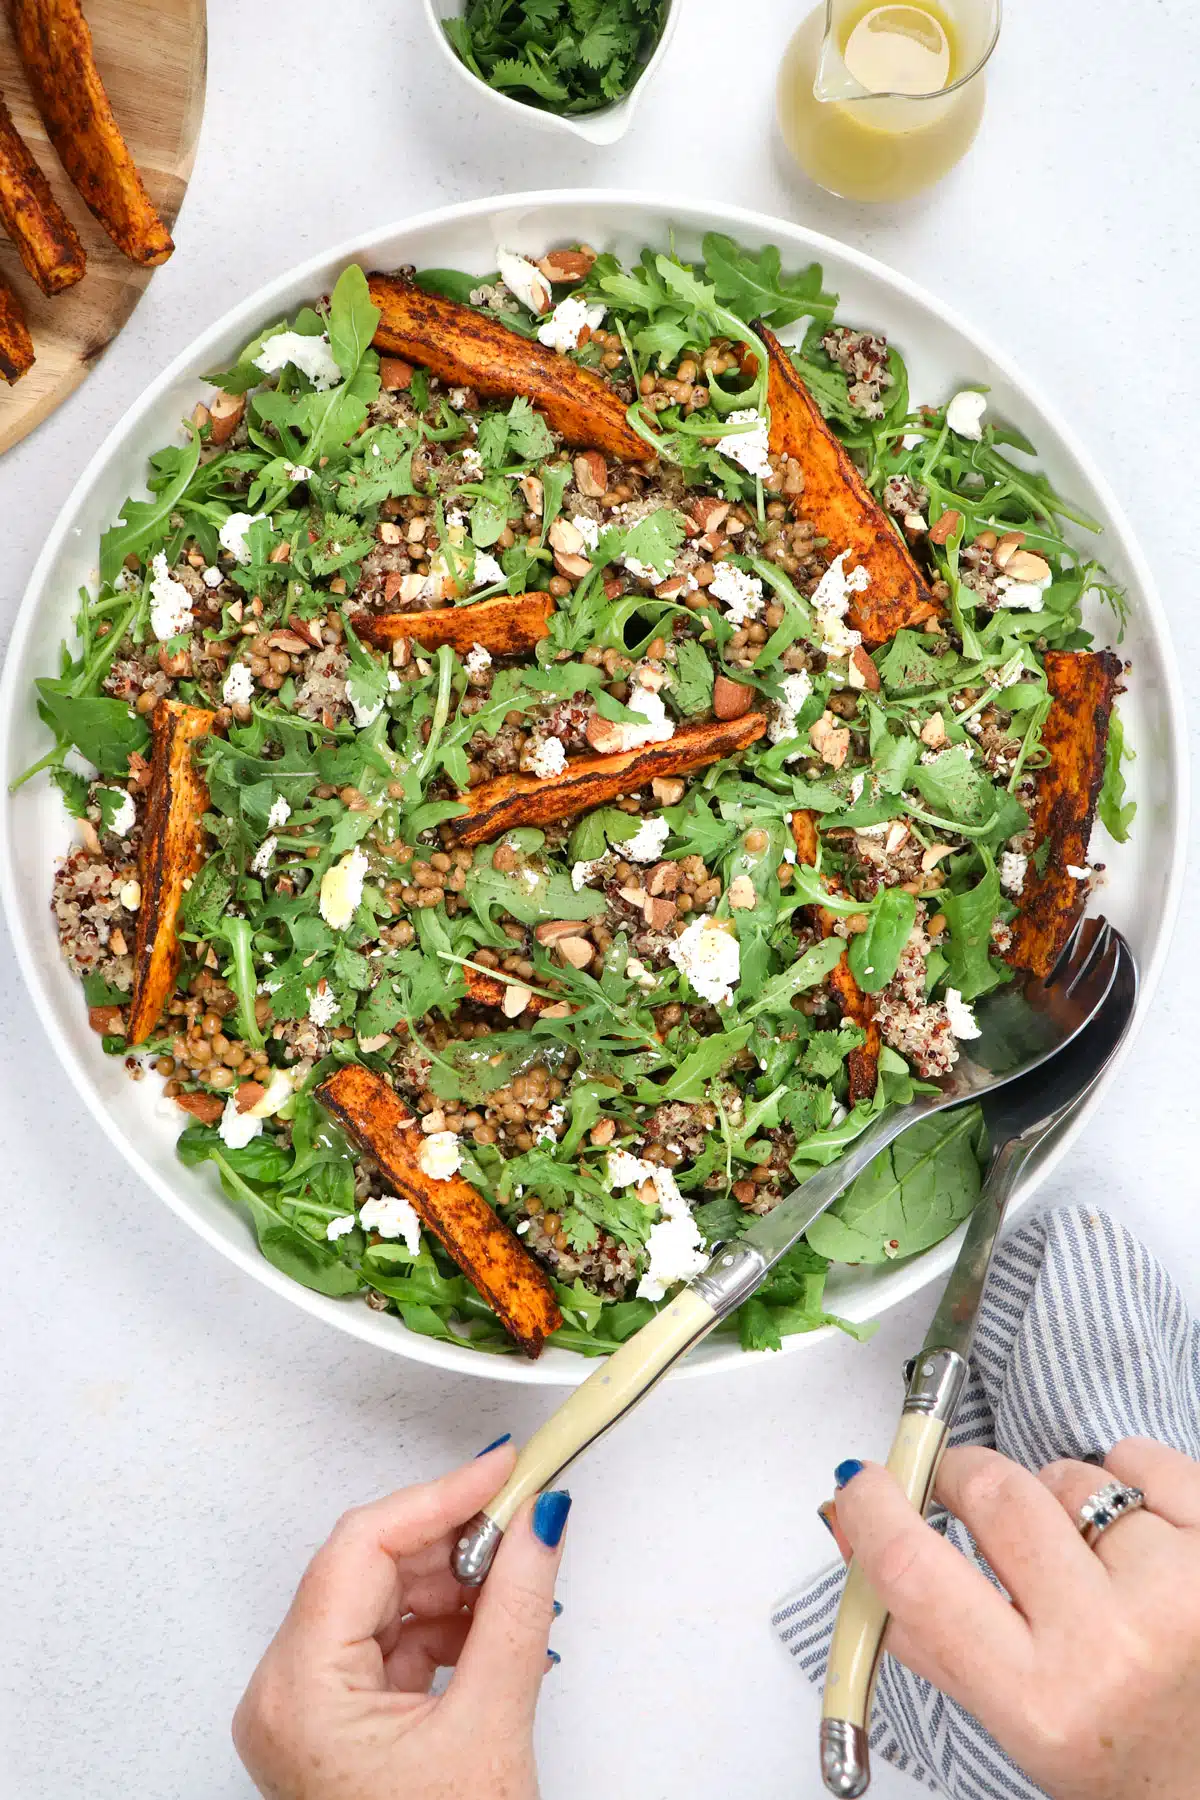 Two white hands holding salad servers are taking sweet potato quinoa salad from a large bowl.